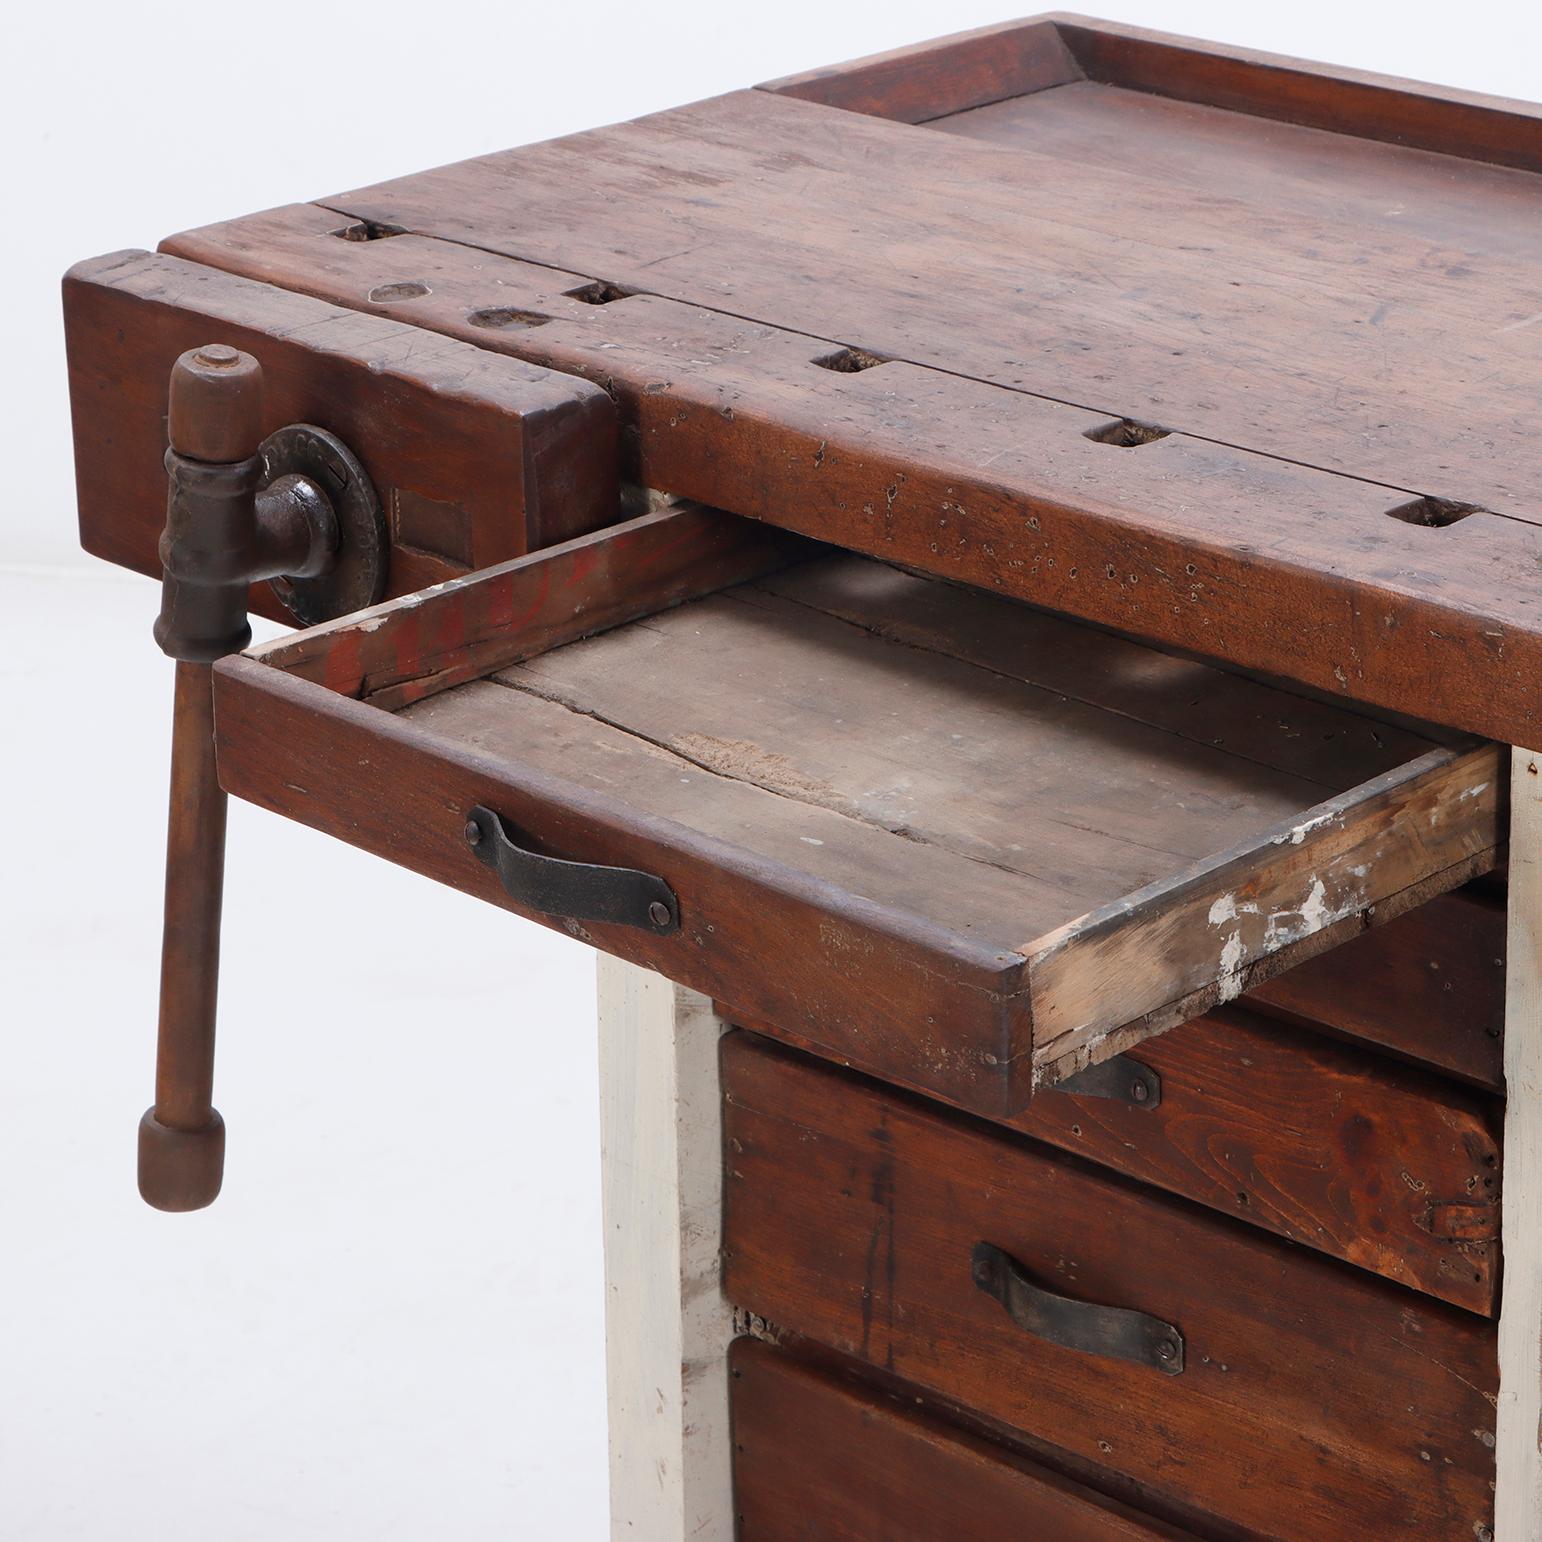 19th Century A 19th century painted work bench having two vice grips. For Sale